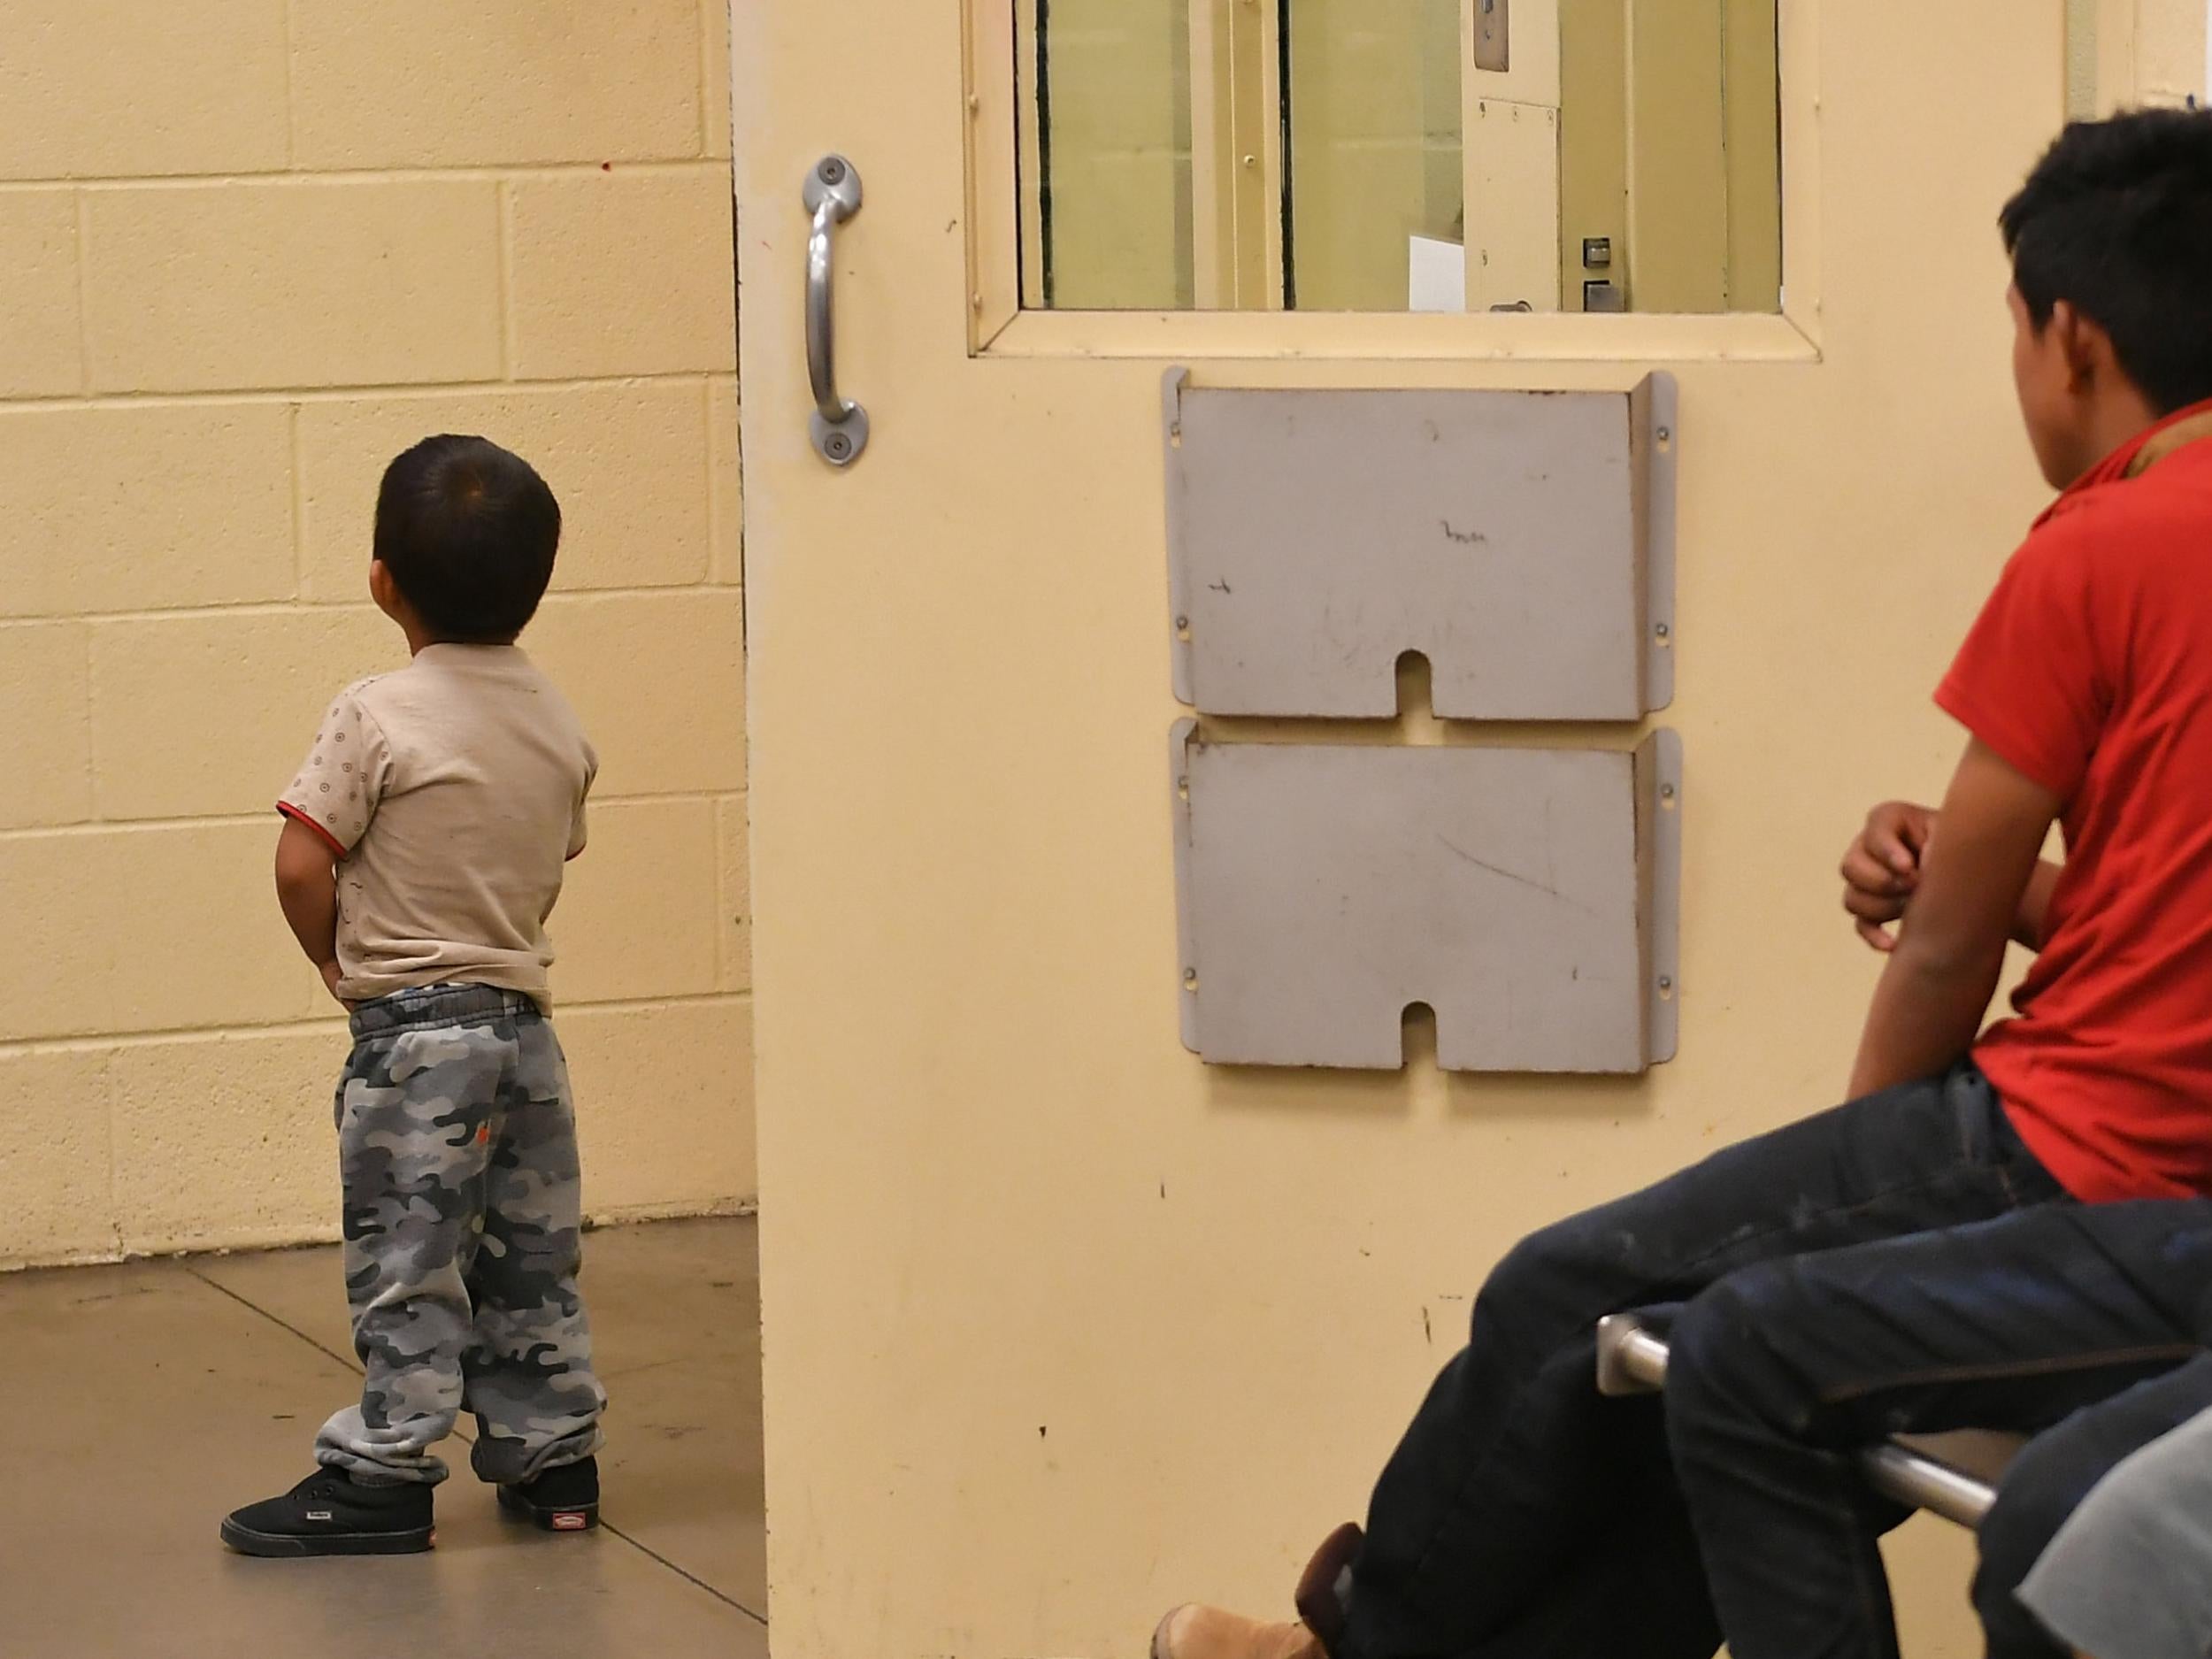 Migrant children as young as 3 being &apos;ordered into court alone&apos; for their own deportation proceedings